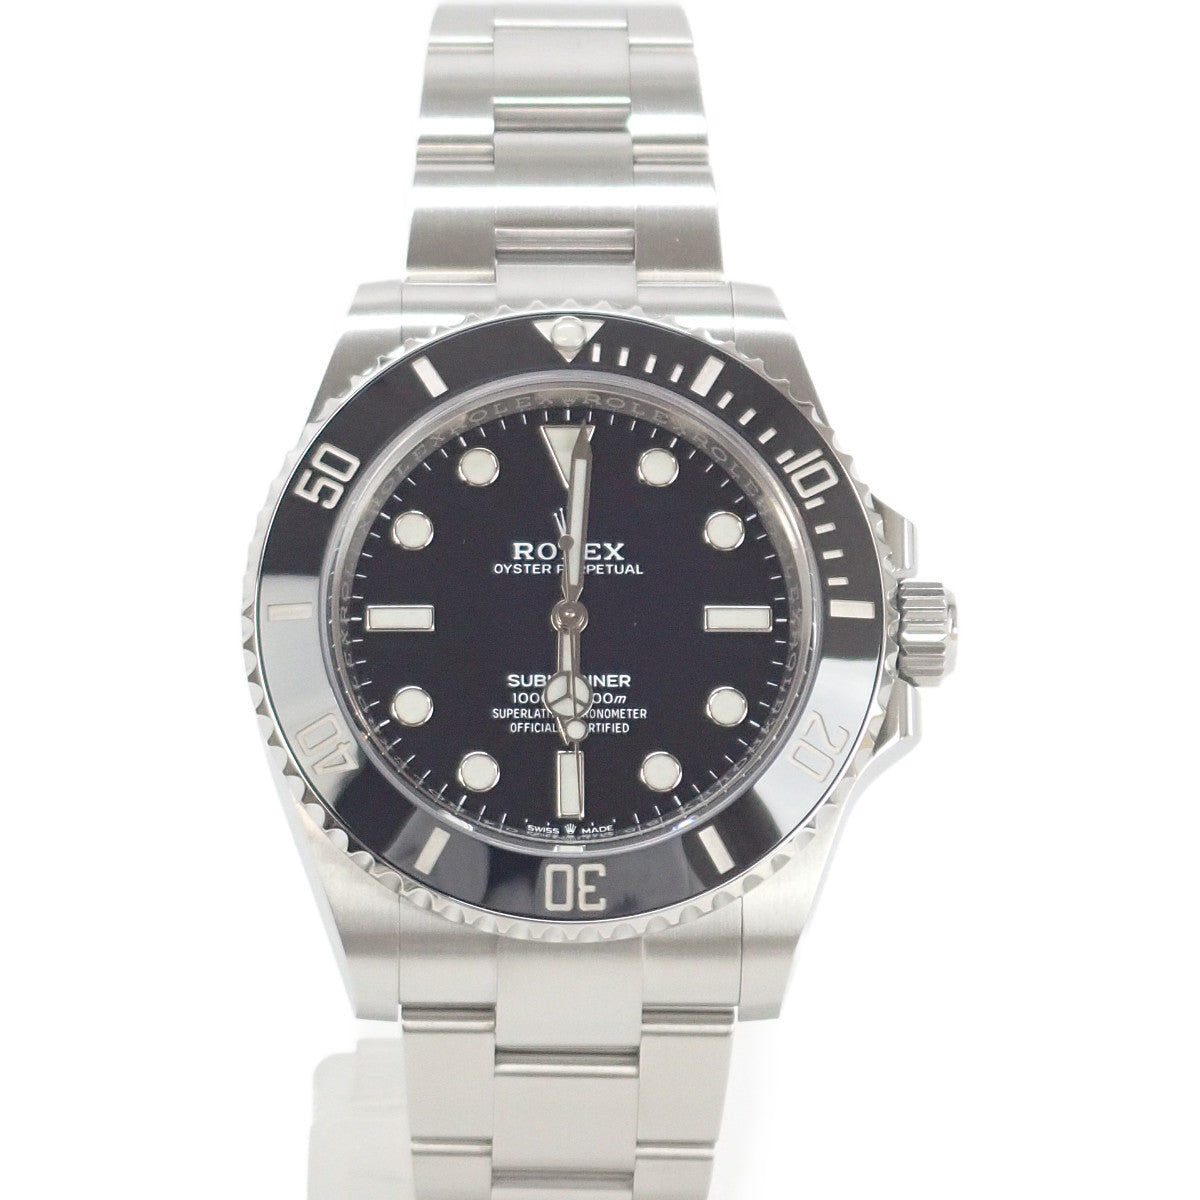 Rolex Men's Submariner Non-Date Watch 124060 with Silver Dial, Stainless Steel (Pre-owned) 124060.0